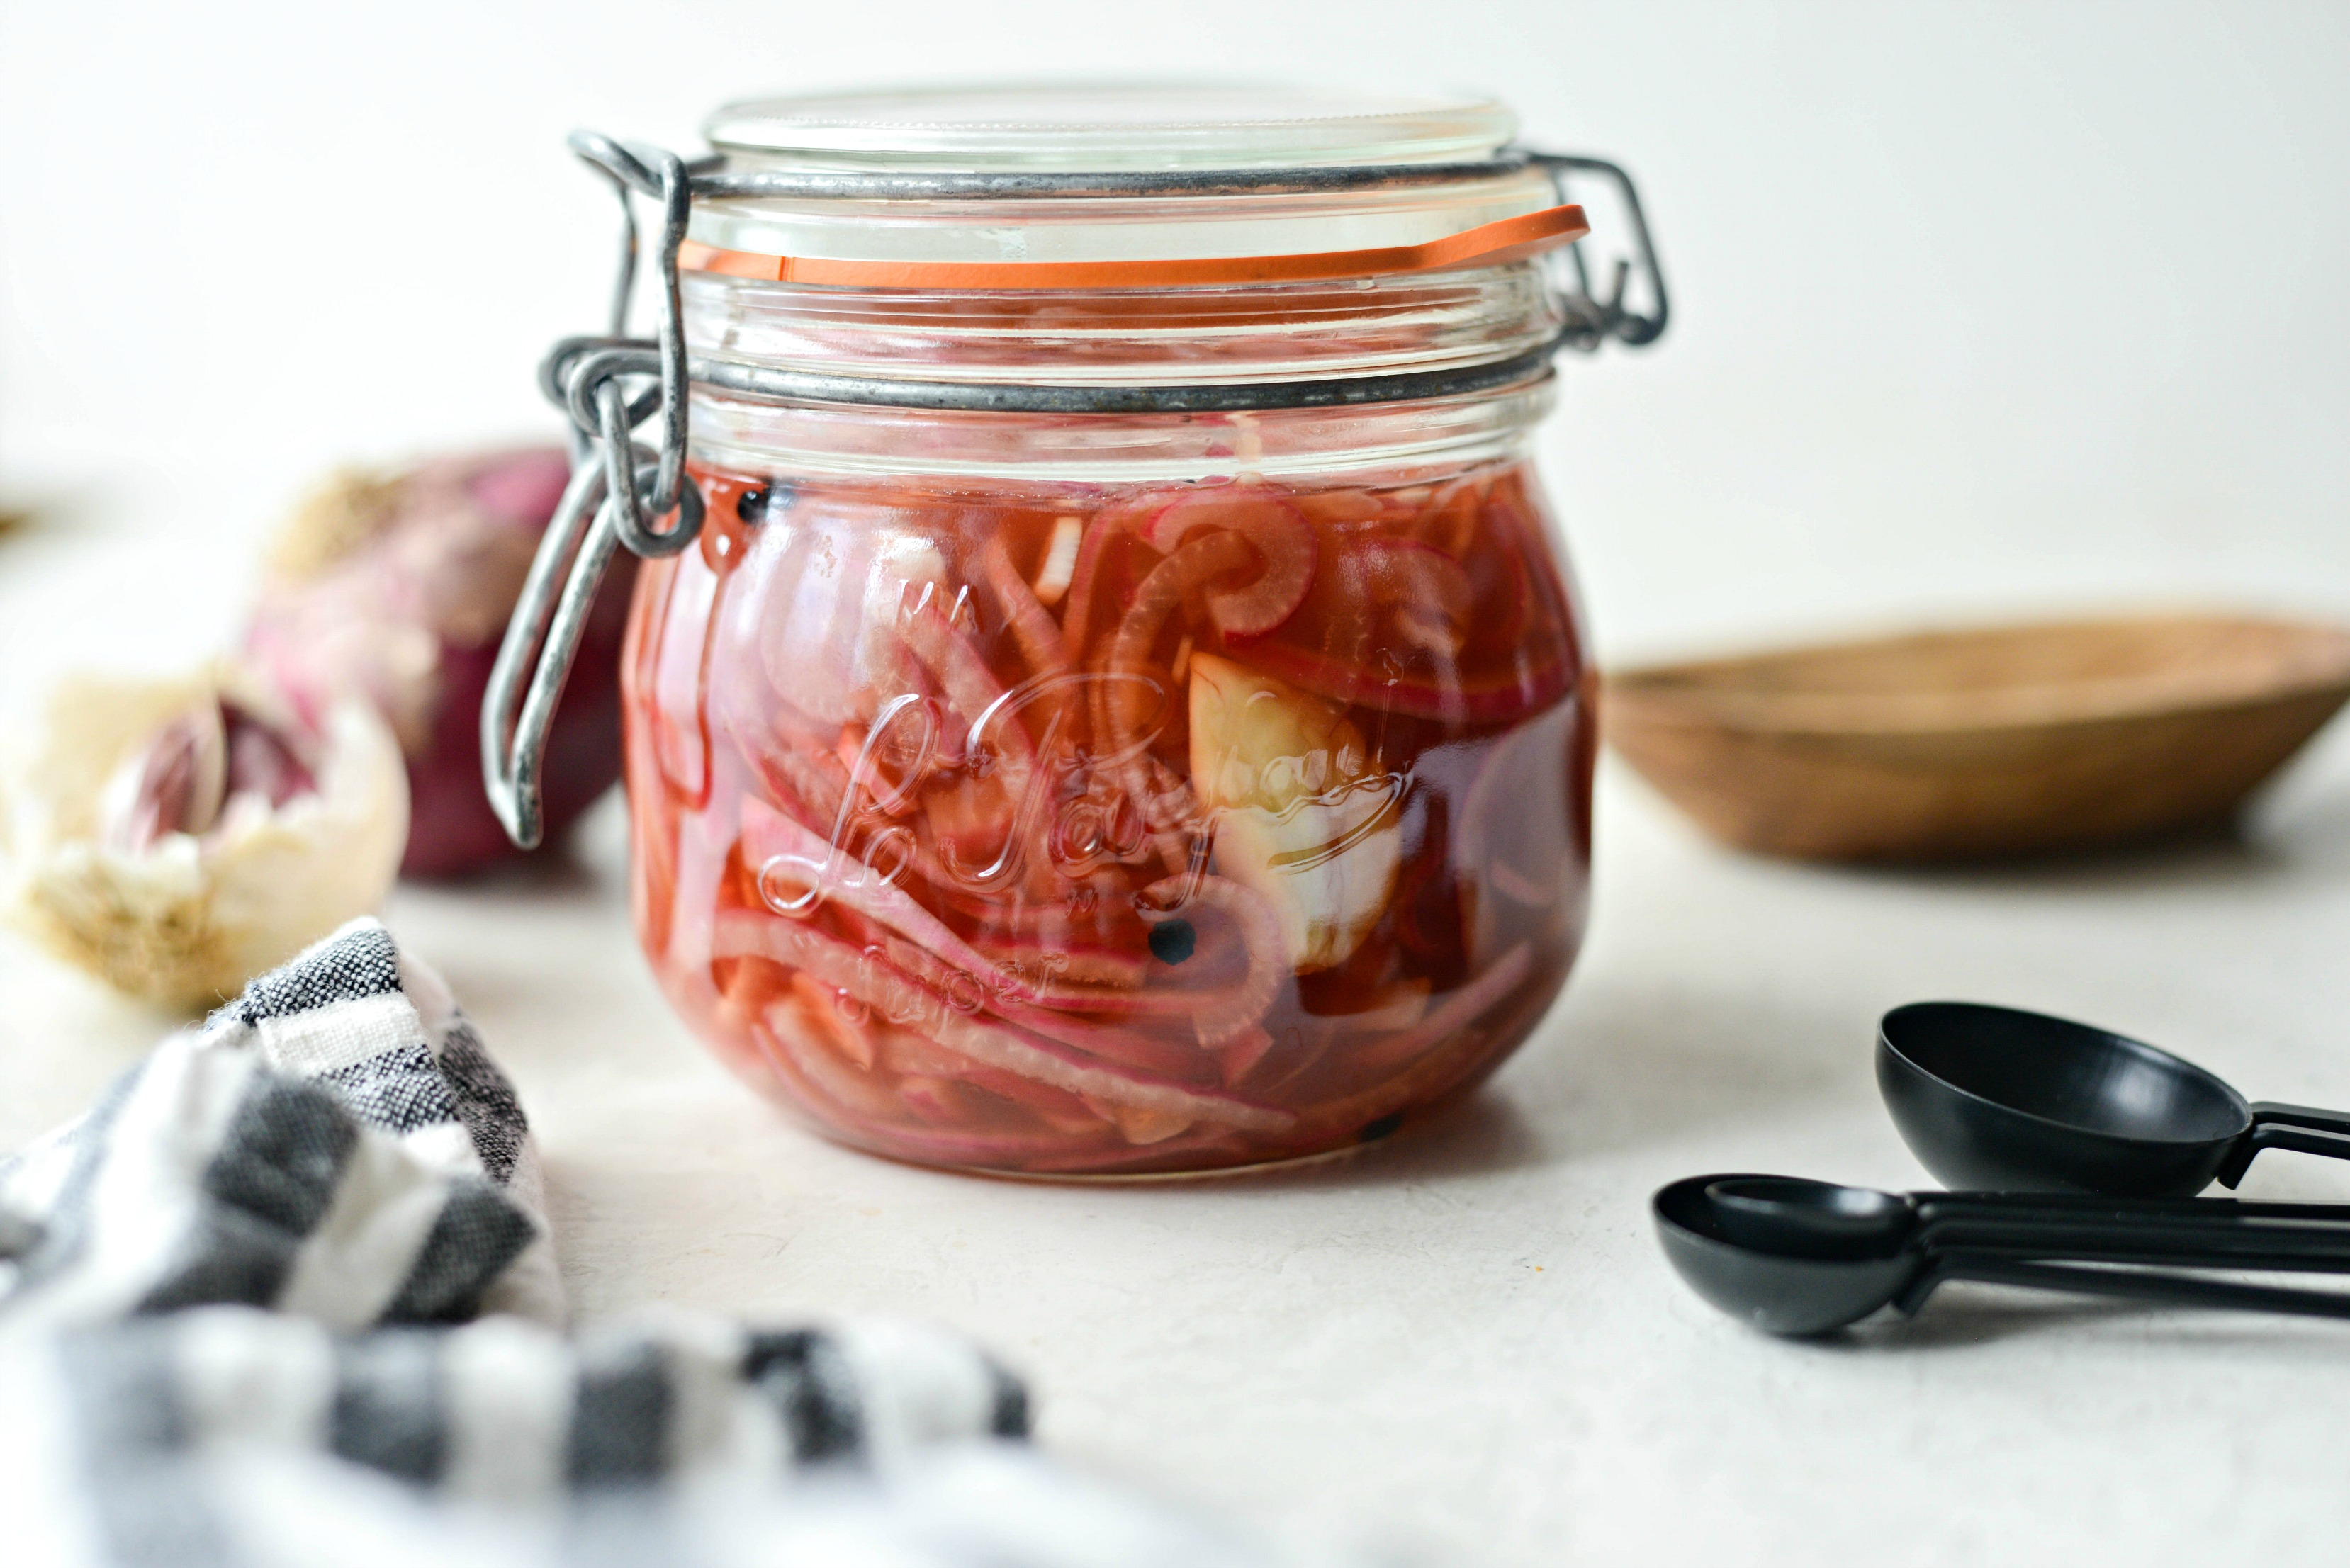 Quick Pickled Red Onions l SimplyScratch.com #homemememade #pickled #redonions #condiments #preserving #pickling